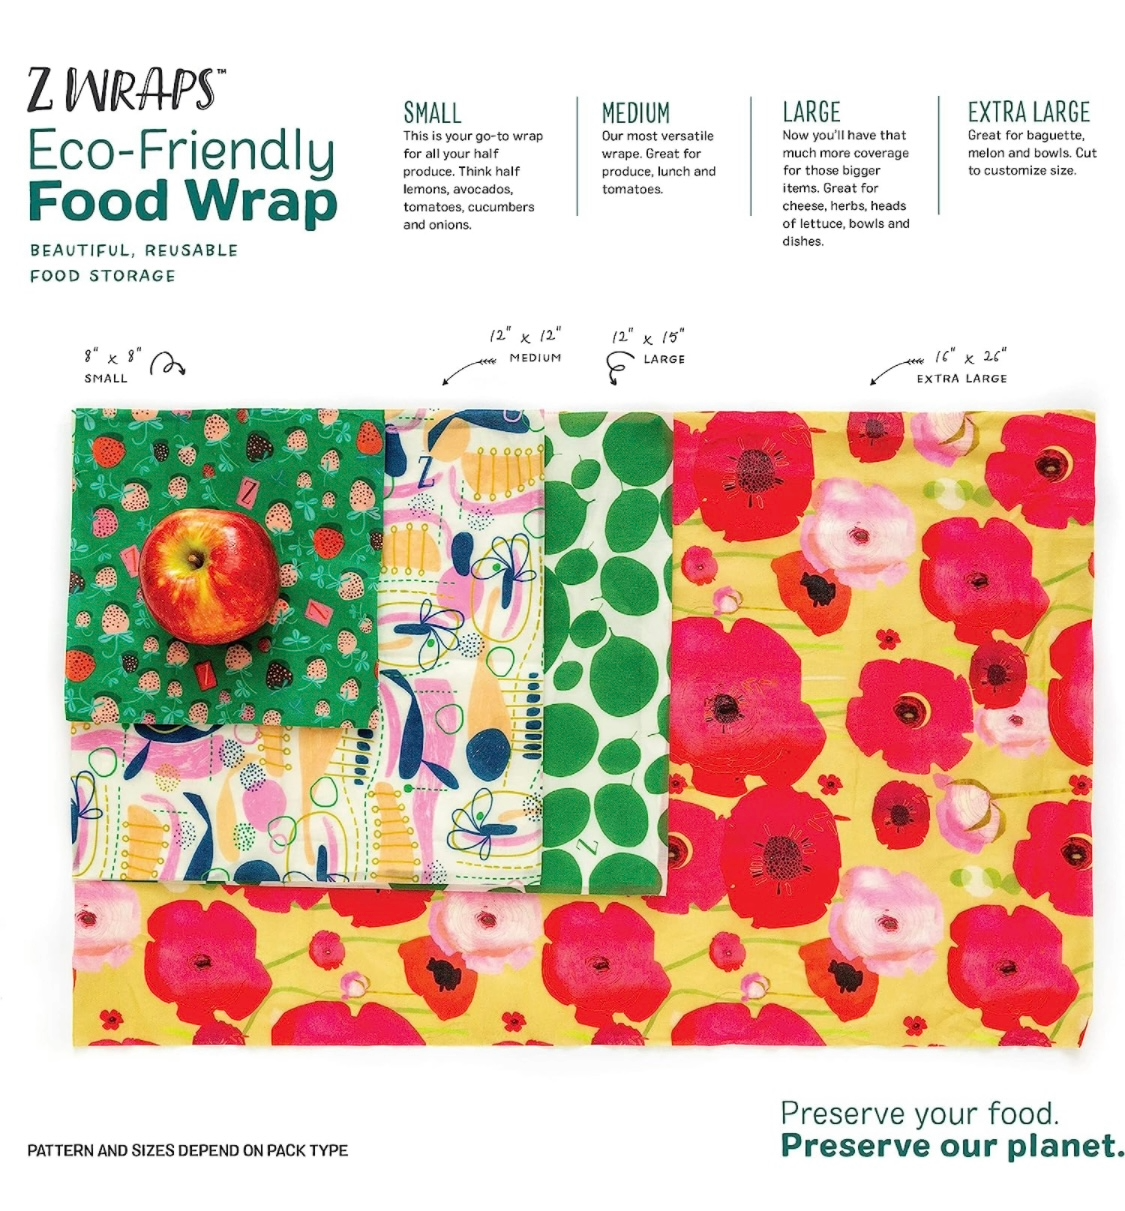 zwraps, reusable beeswax food wrap comparing small, medium, large and extra large sizes